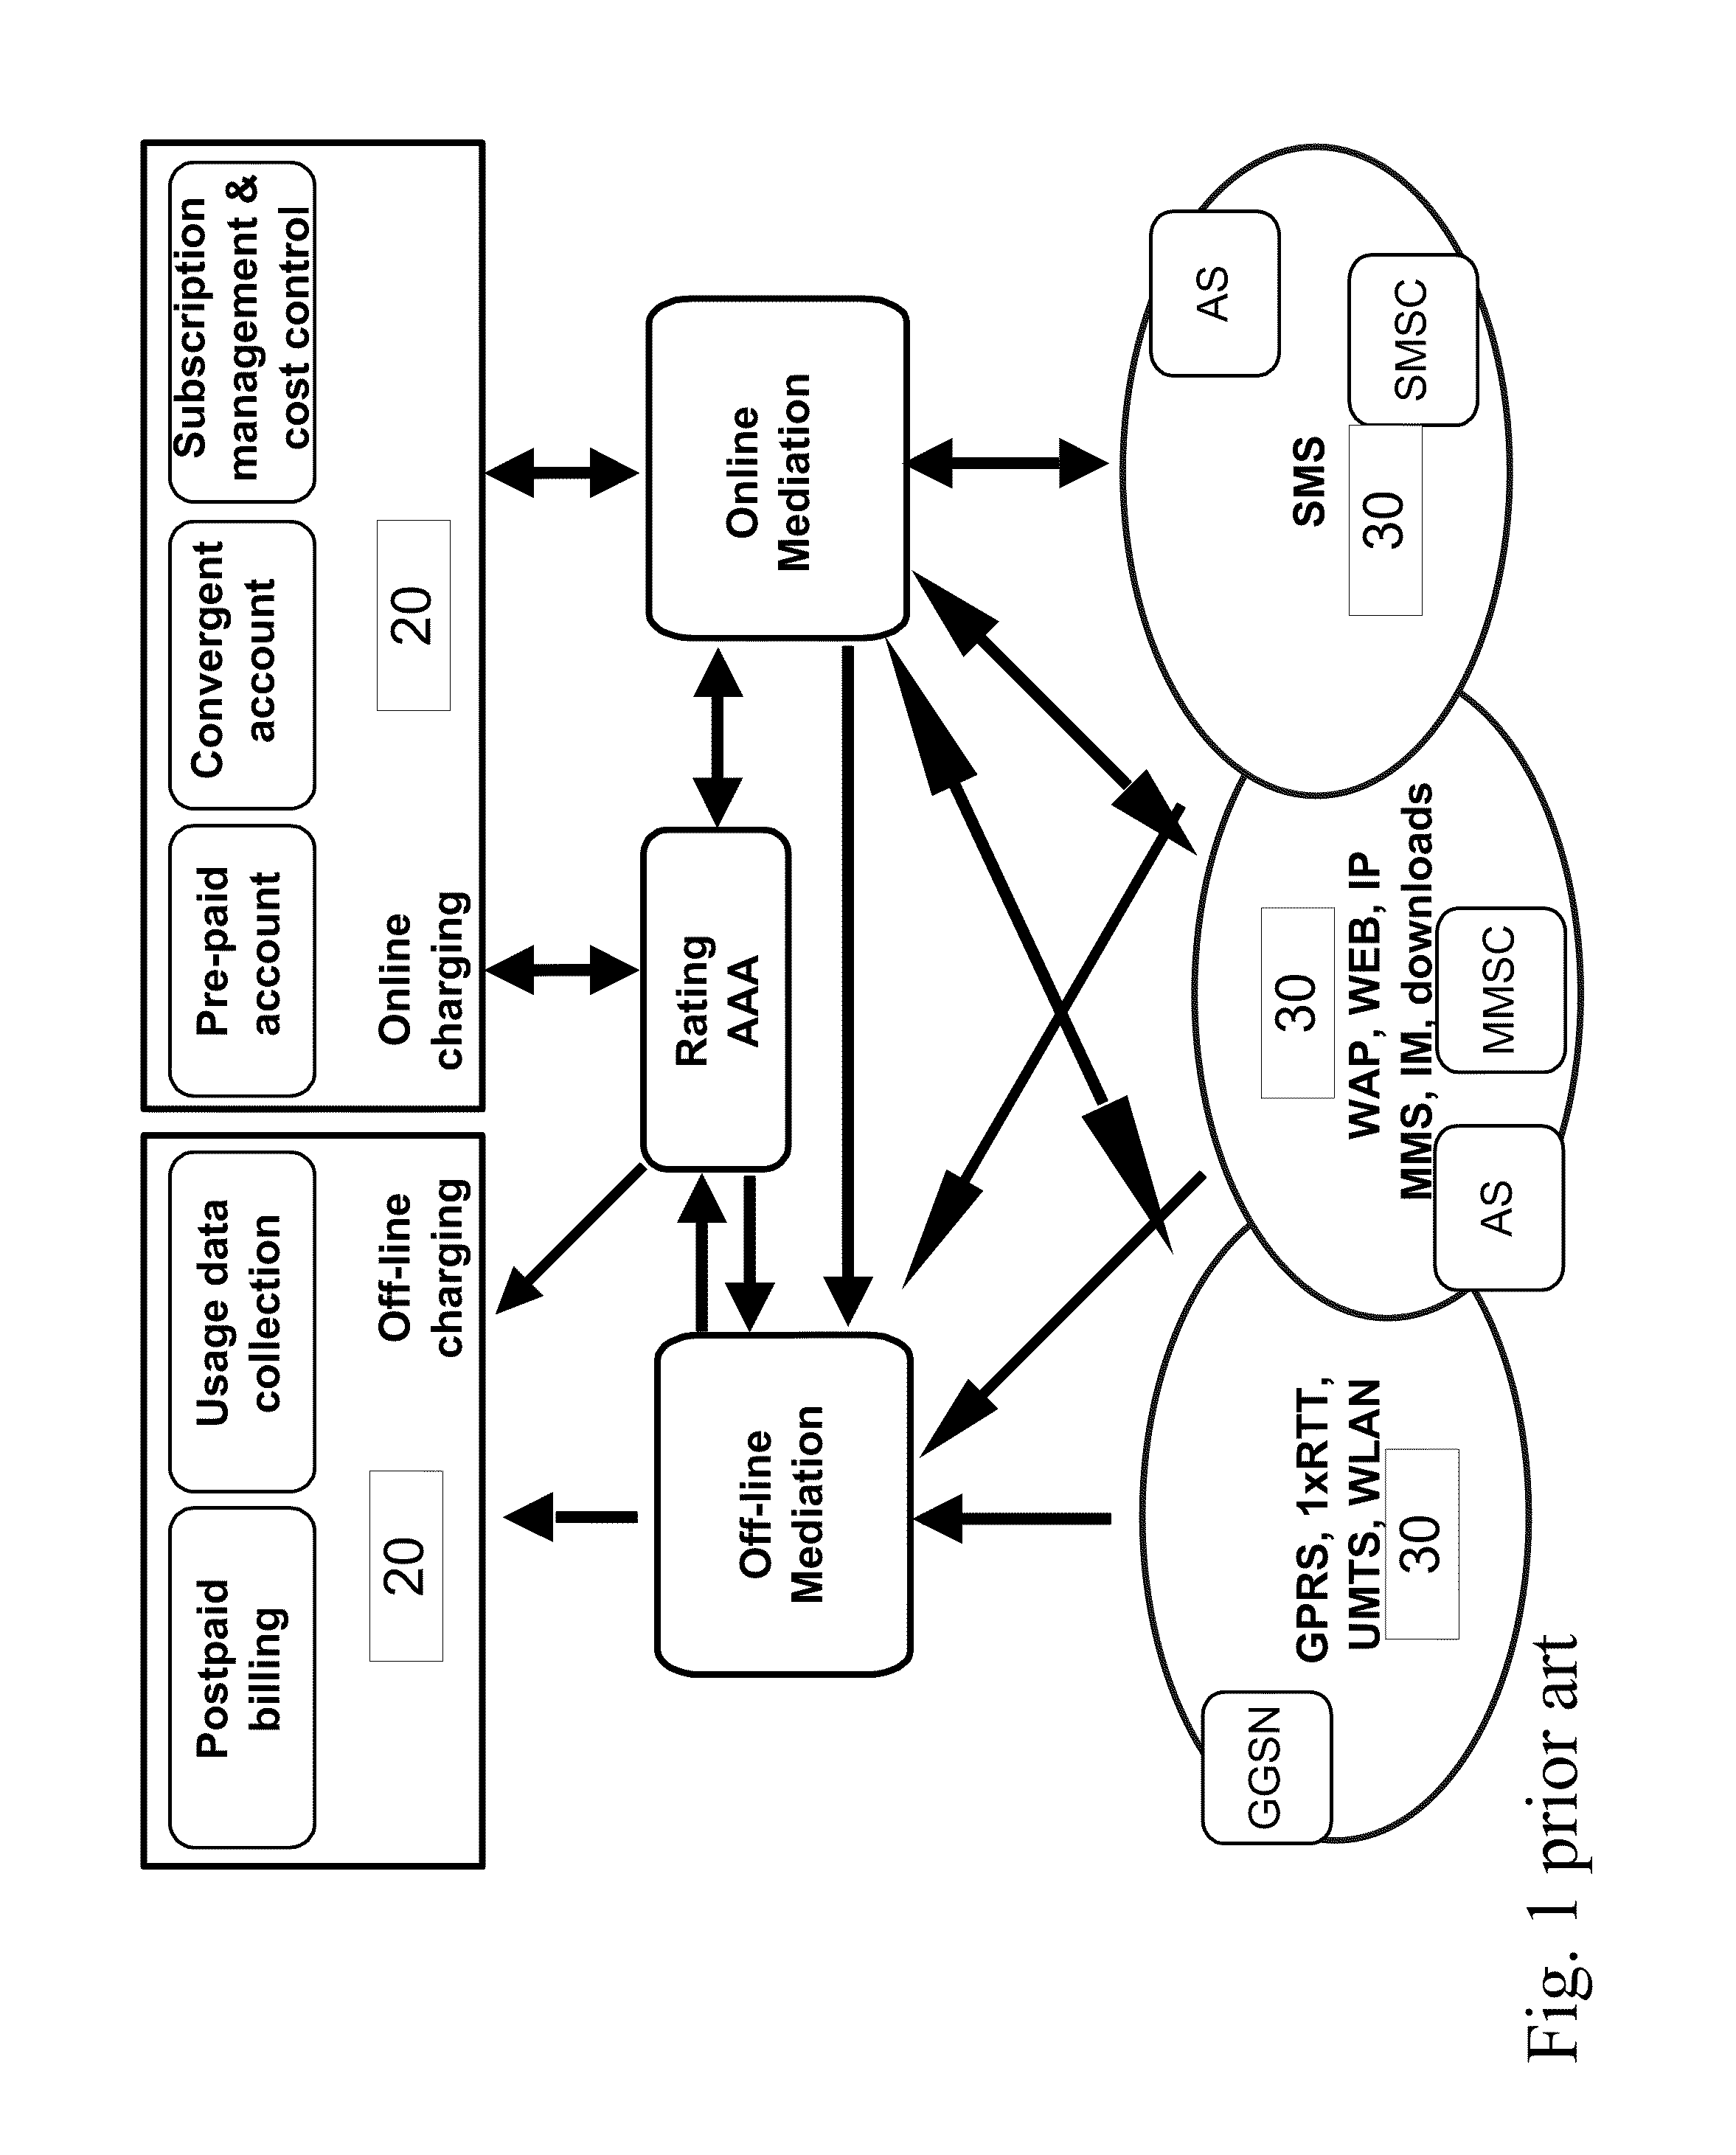 Convergent Mediation System With Dedicated Online Steams